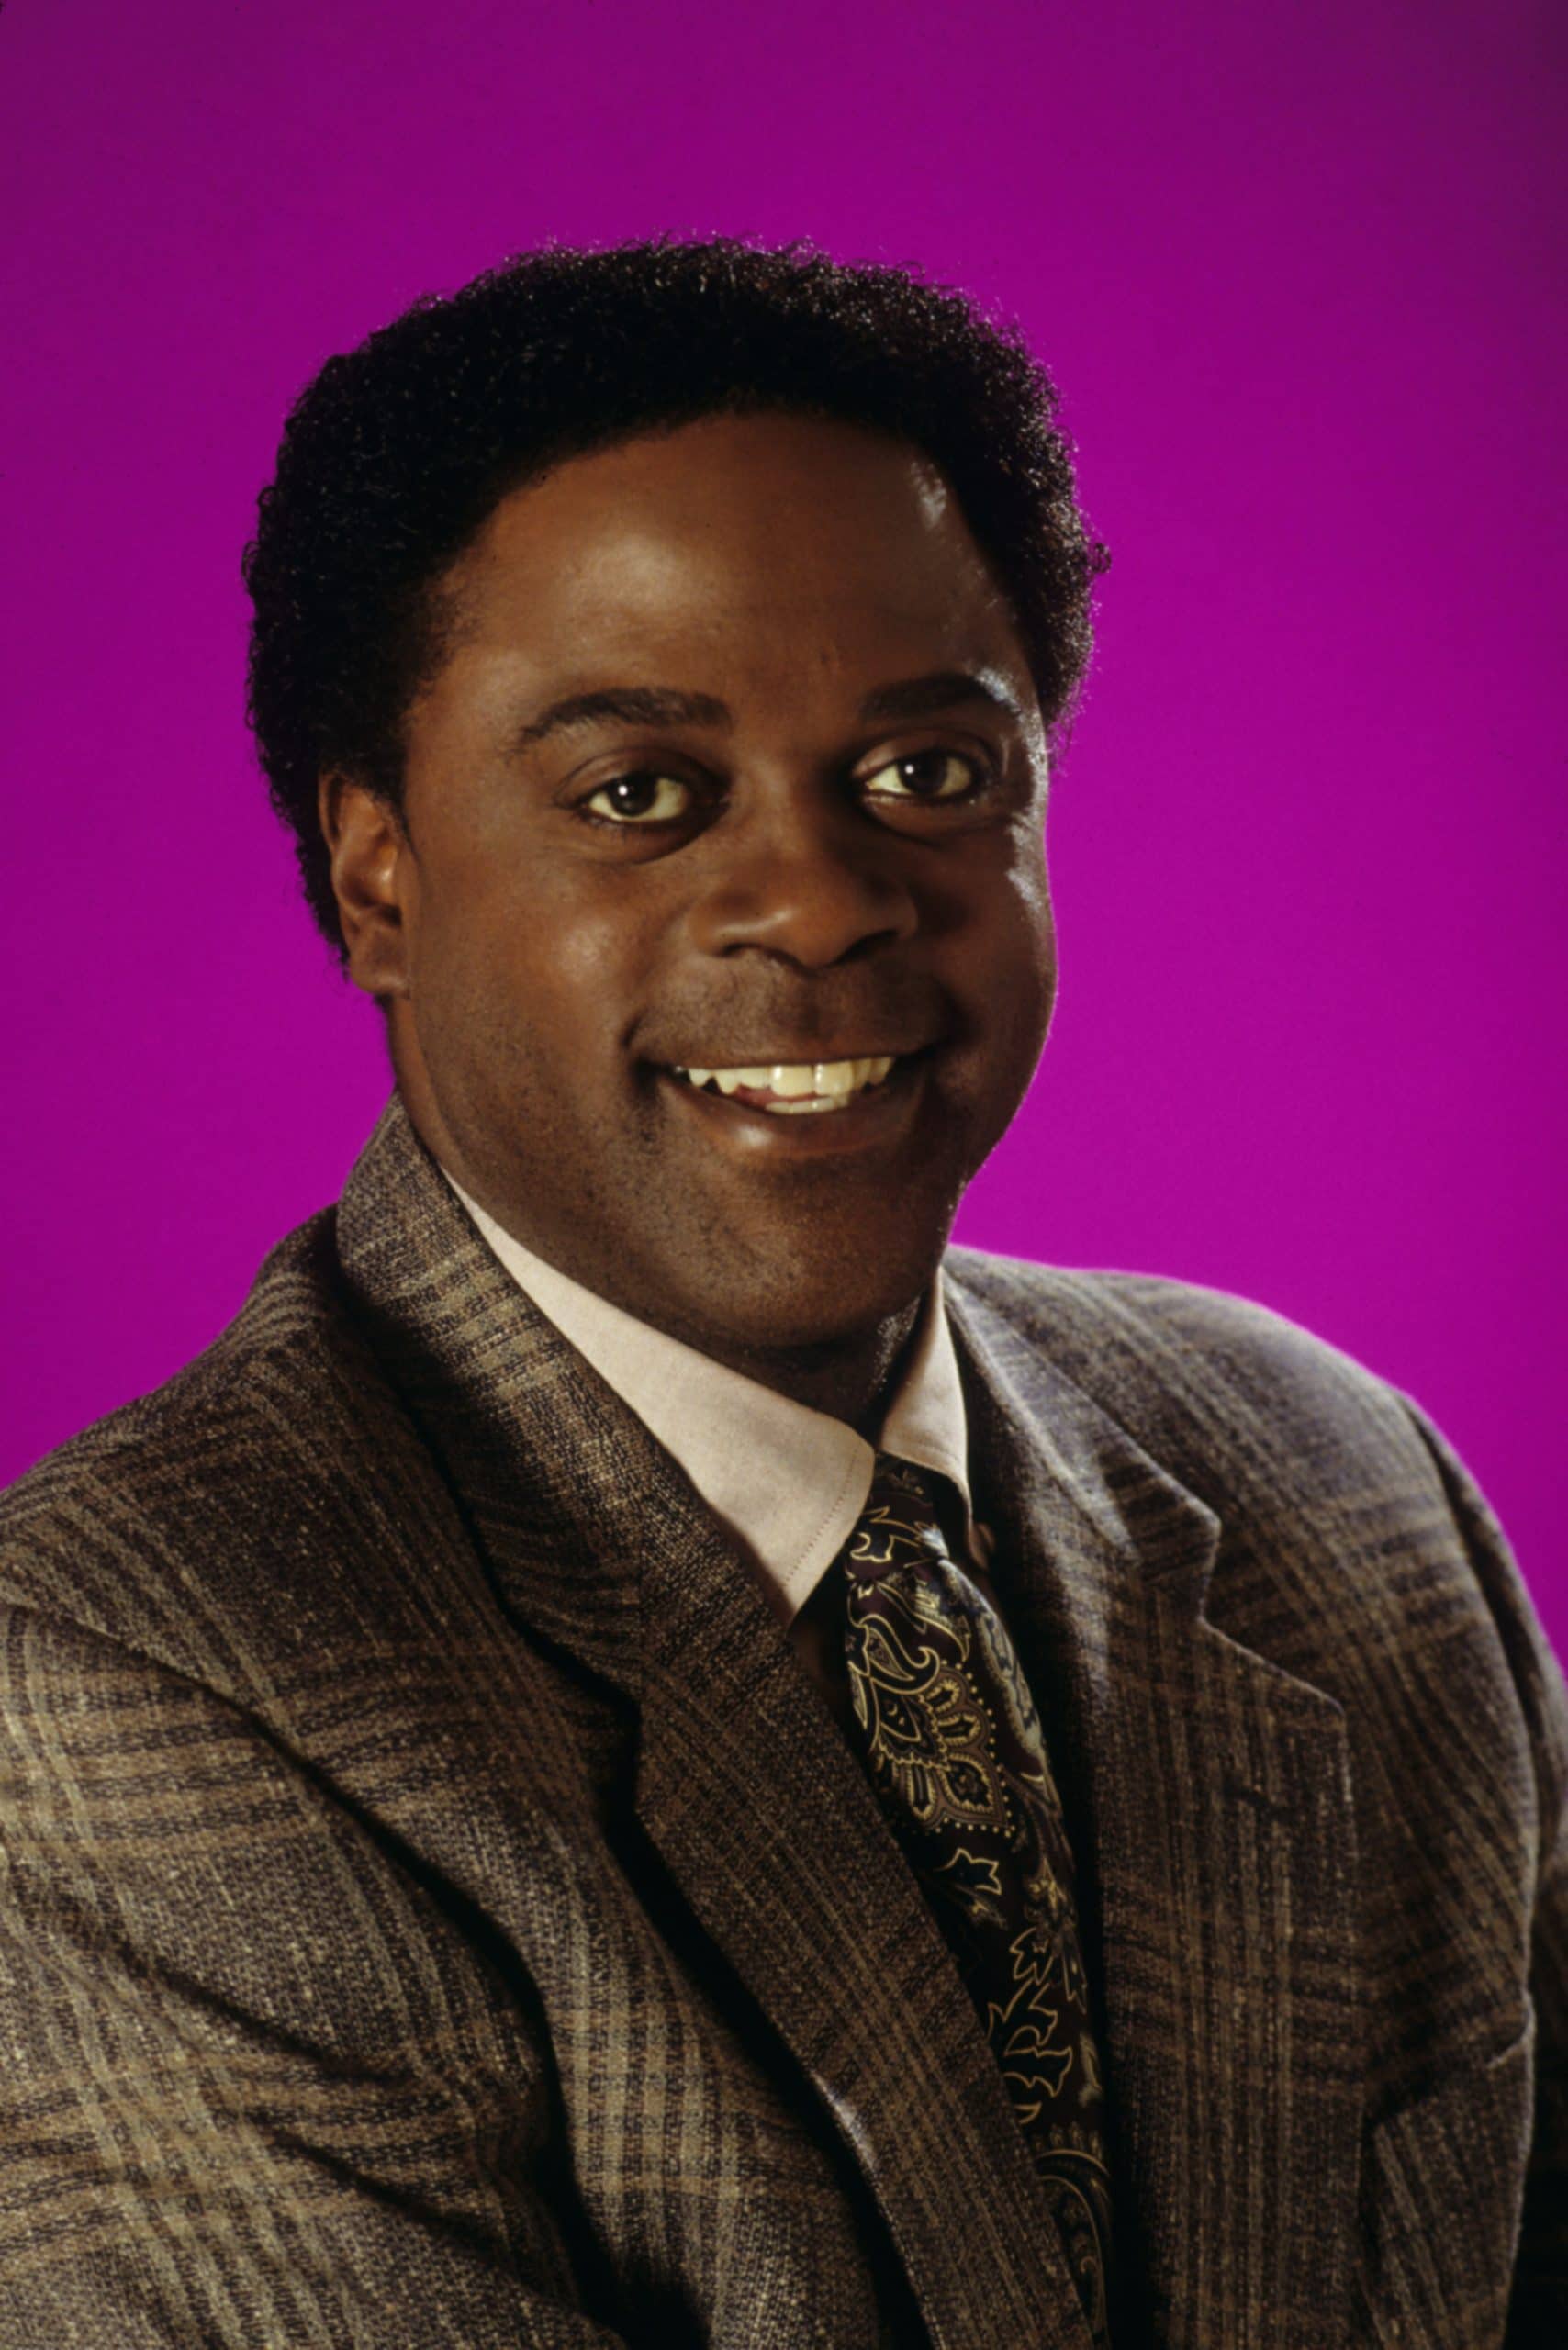 Howard Rollins From 'In The Heat Of The Night' Made A Comeback Before